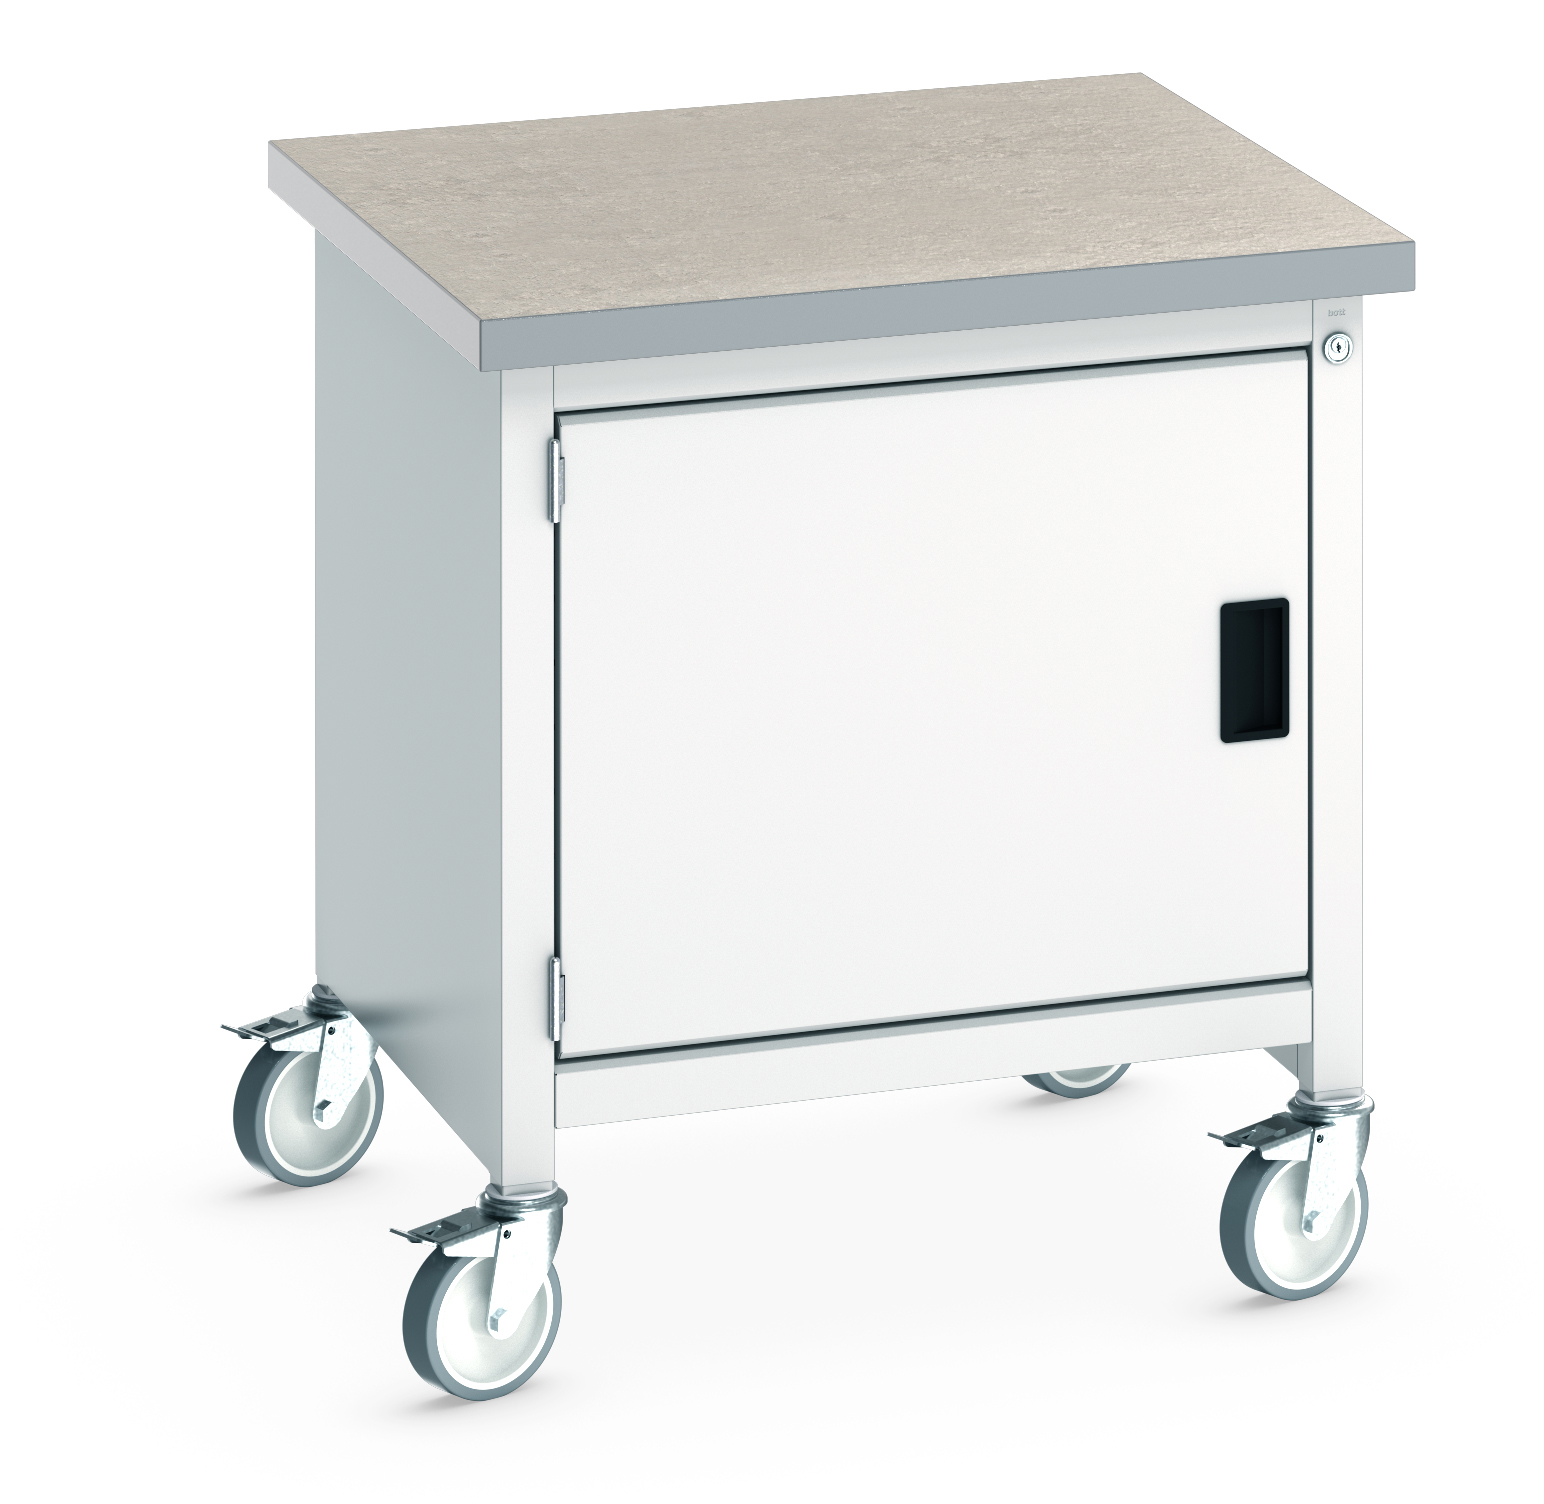 Bott Cubio Mobile Storage Bench With Full Cupboard - 41002087.16V